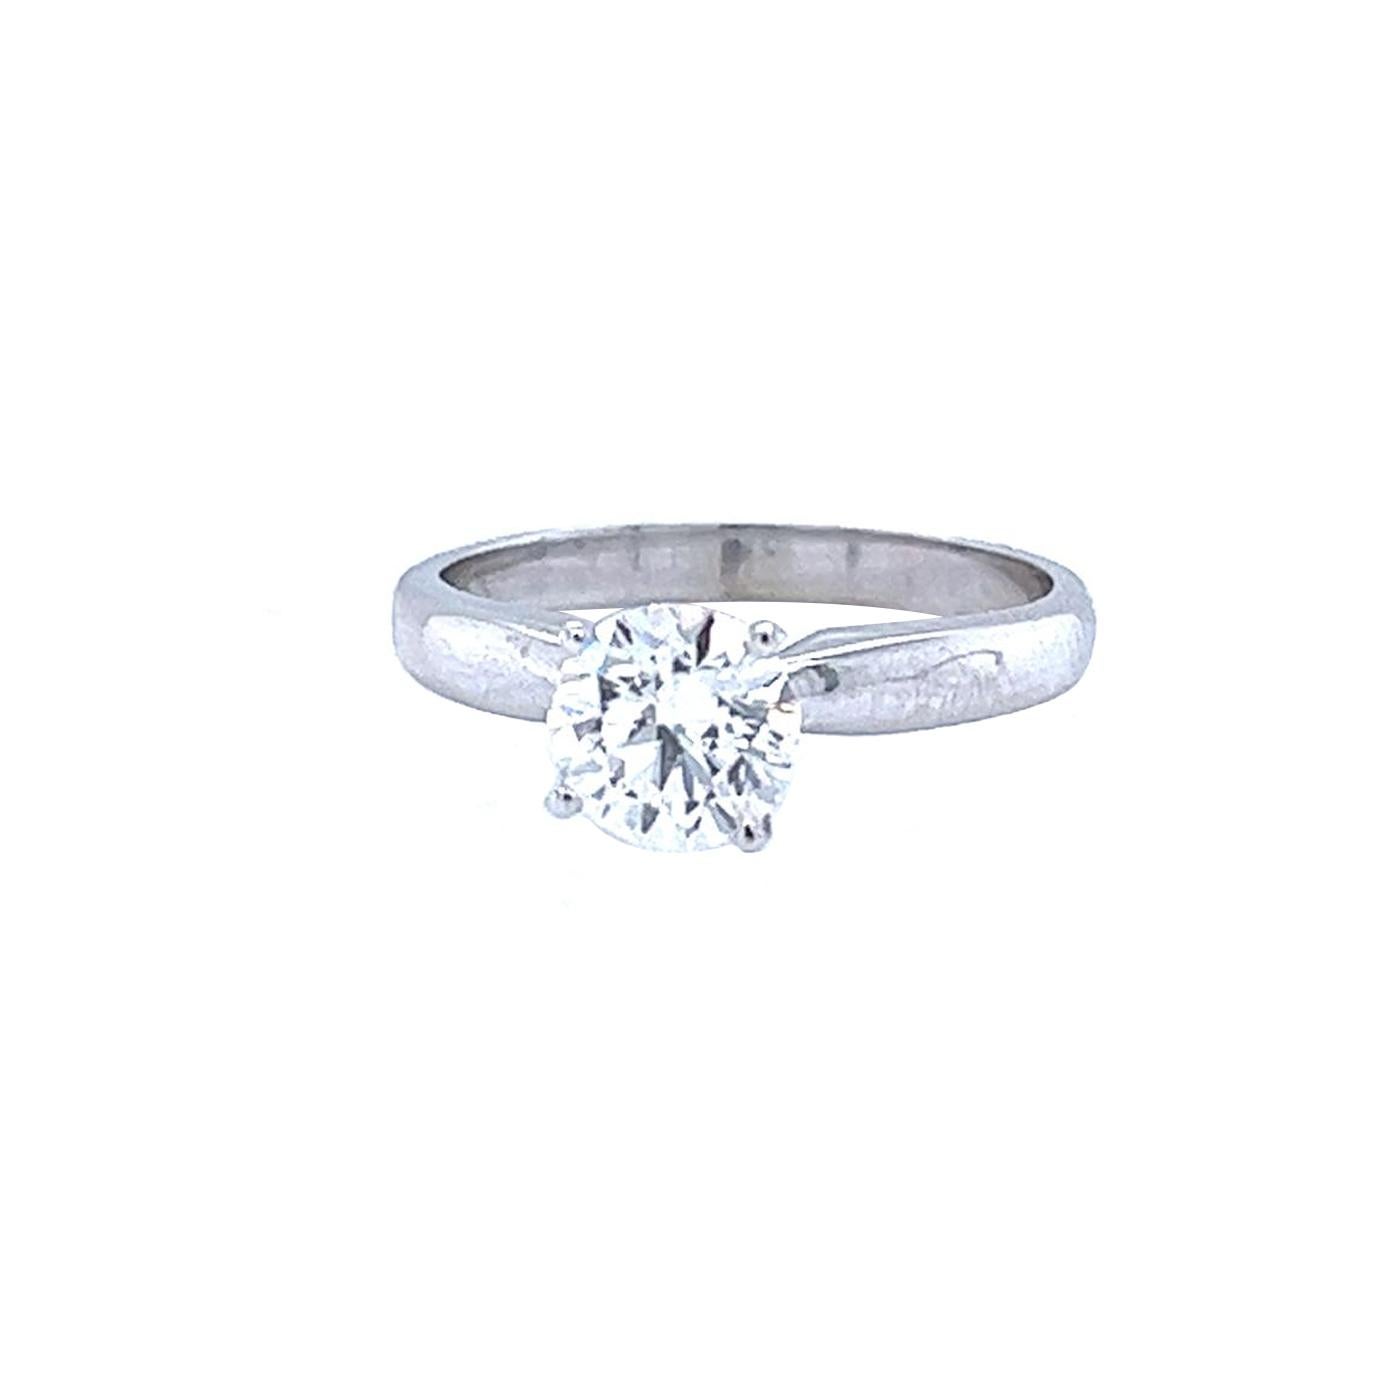 Natural Round Cut Shape Diamond Ring. The Tiffany Style 14K Diamond design of the ring displays maximum sparkle and brilliance. This luxurious Diamond ring is an absolute stunner! Beautiful center diamond mounted in 14K Gold. Maximum sparkle for a